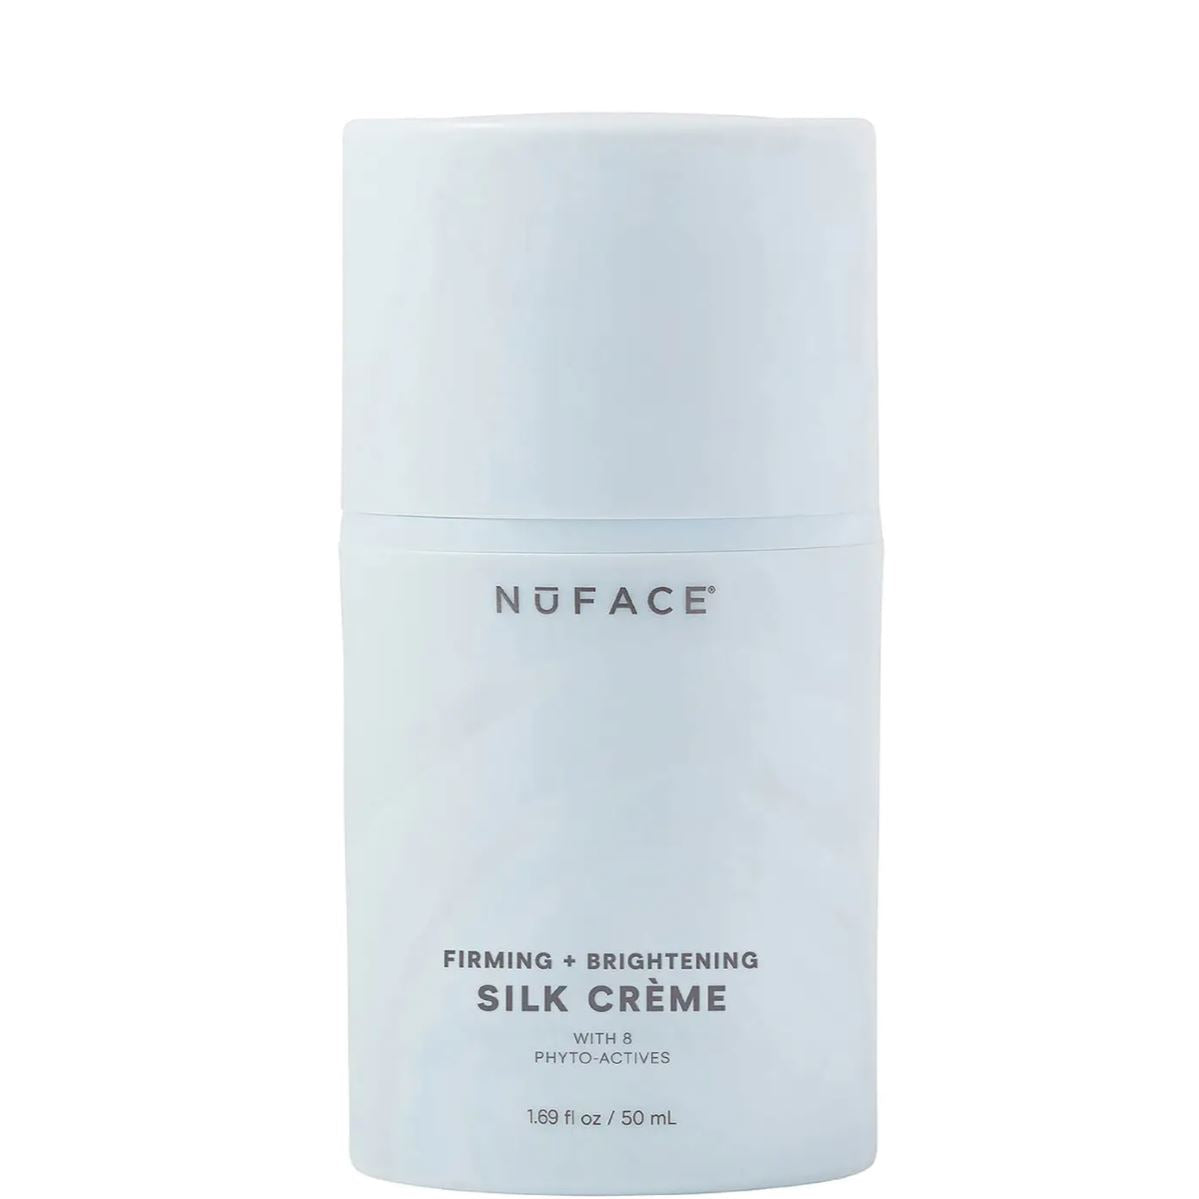 NuFACE Firming + Brightening Silk Creme NuFACE 1.69 oz. Shop at Exclusive Beauty Club